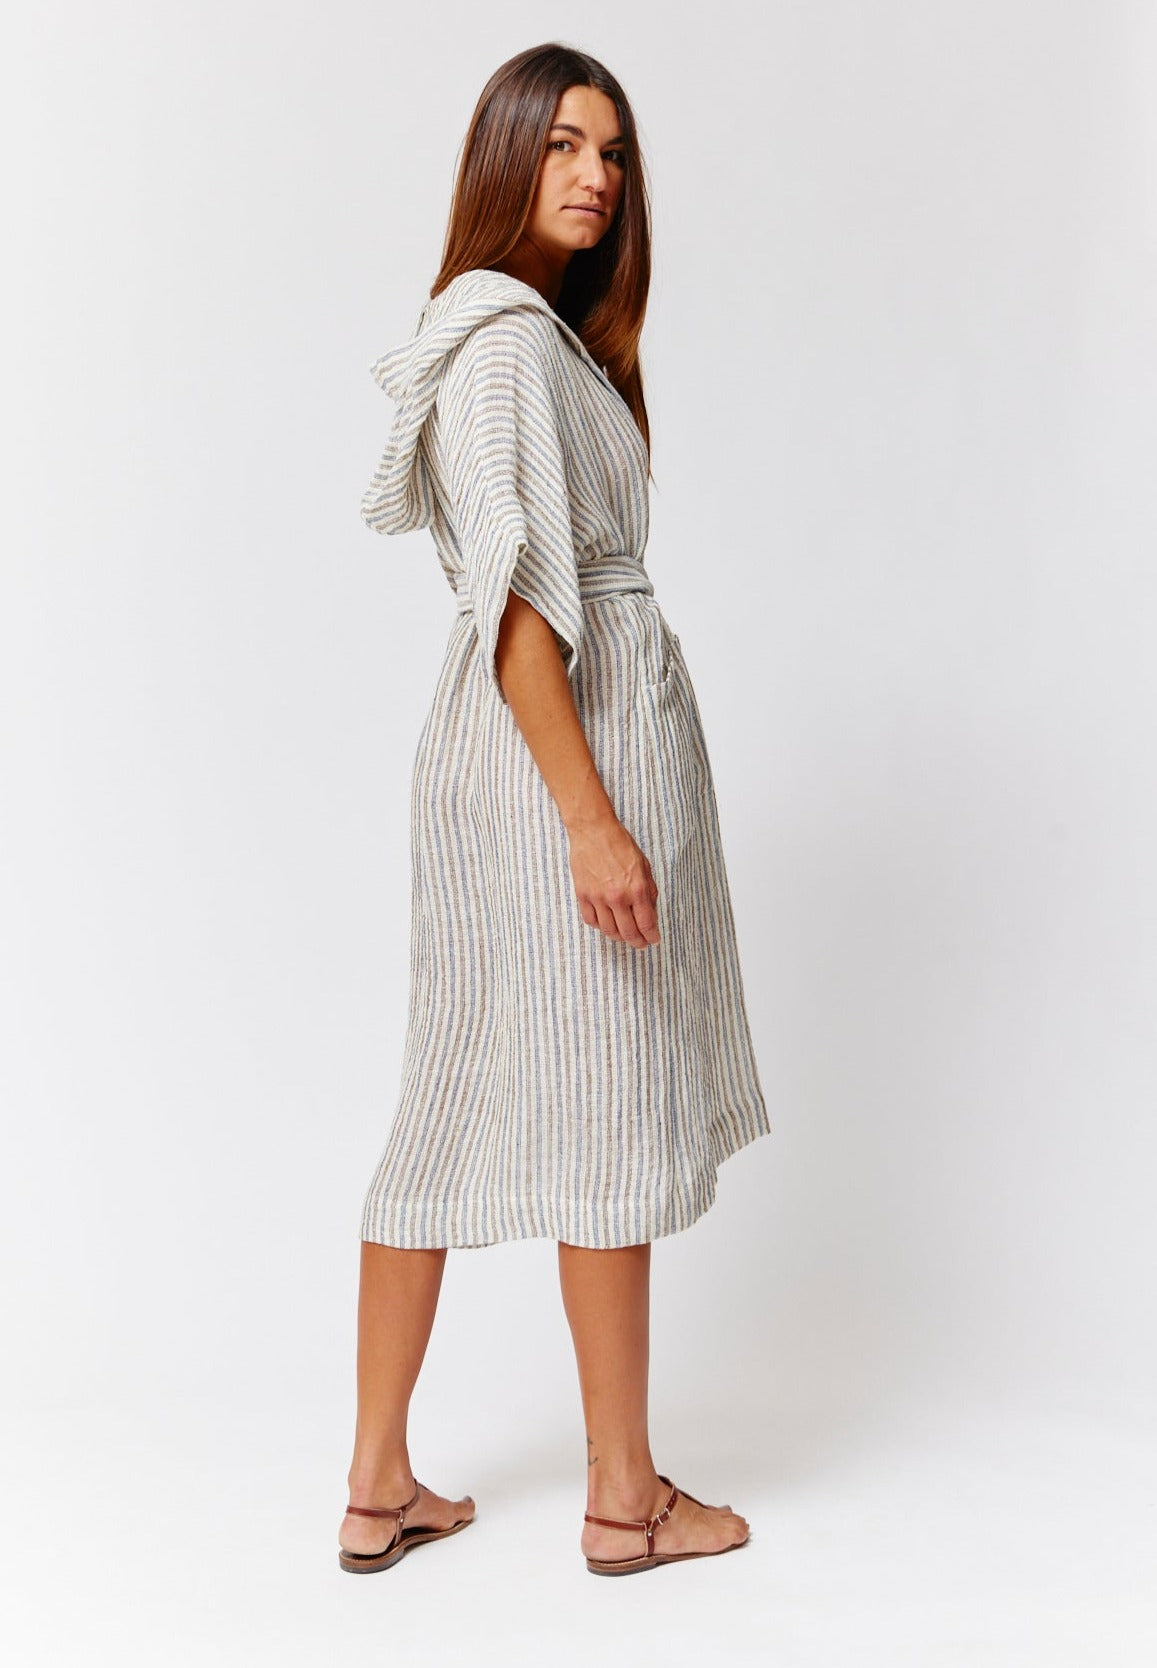 THE HOODED DRESSING GOWN in NATURAL/NAVY/BROWN STRIPED CHIOS GAUZE